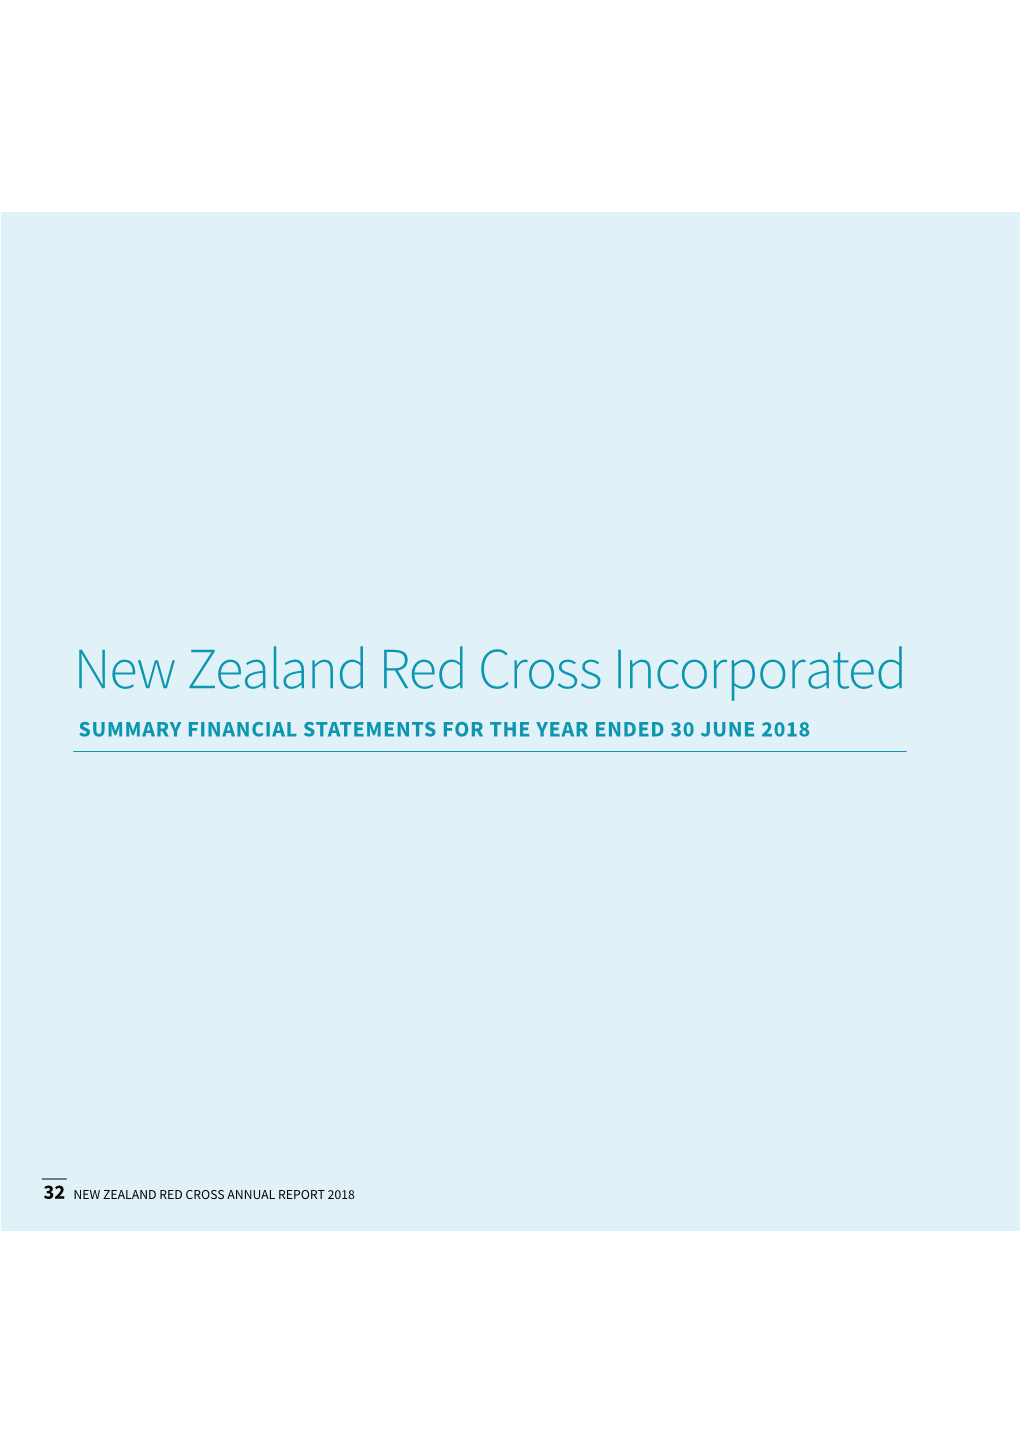 New Zealand Red Cross Incorporated SUMMARY FINANCIAL STATEMENTS for the YEAR ENDED 30 JUNE 2018